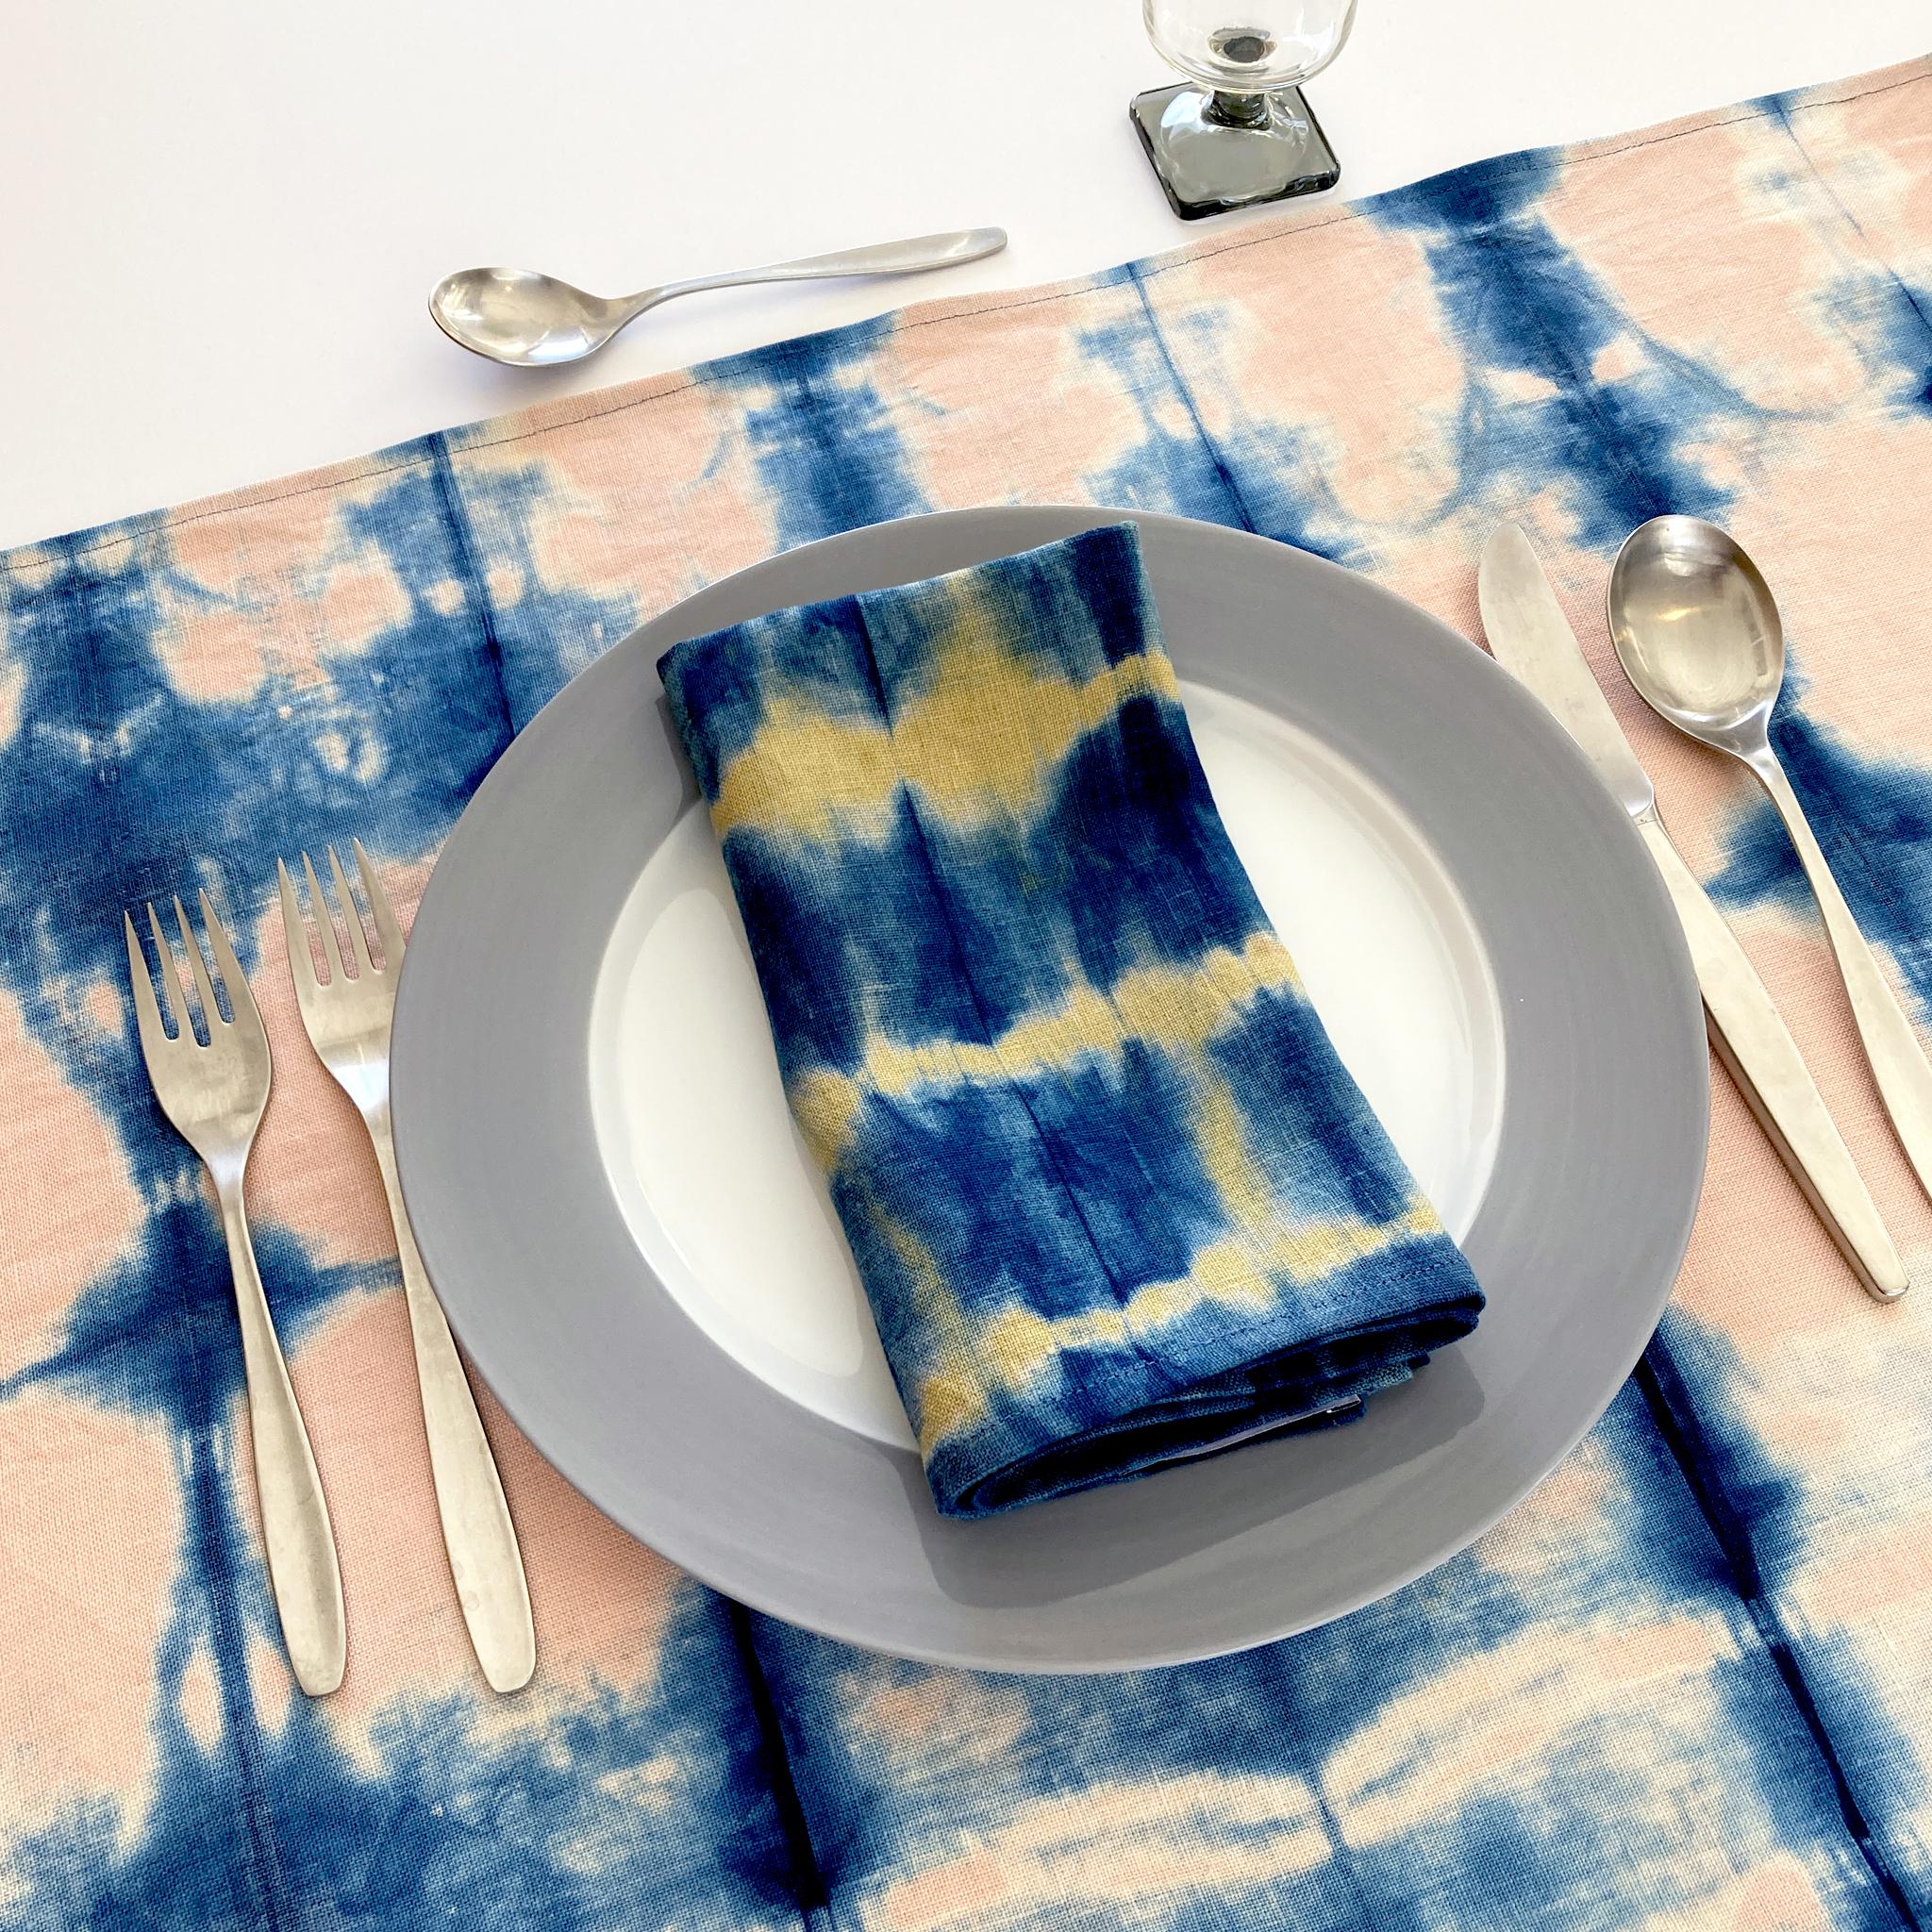 American Hand Dyed Linen Table Runner, Rose Pink & Indigo Blue For Sale